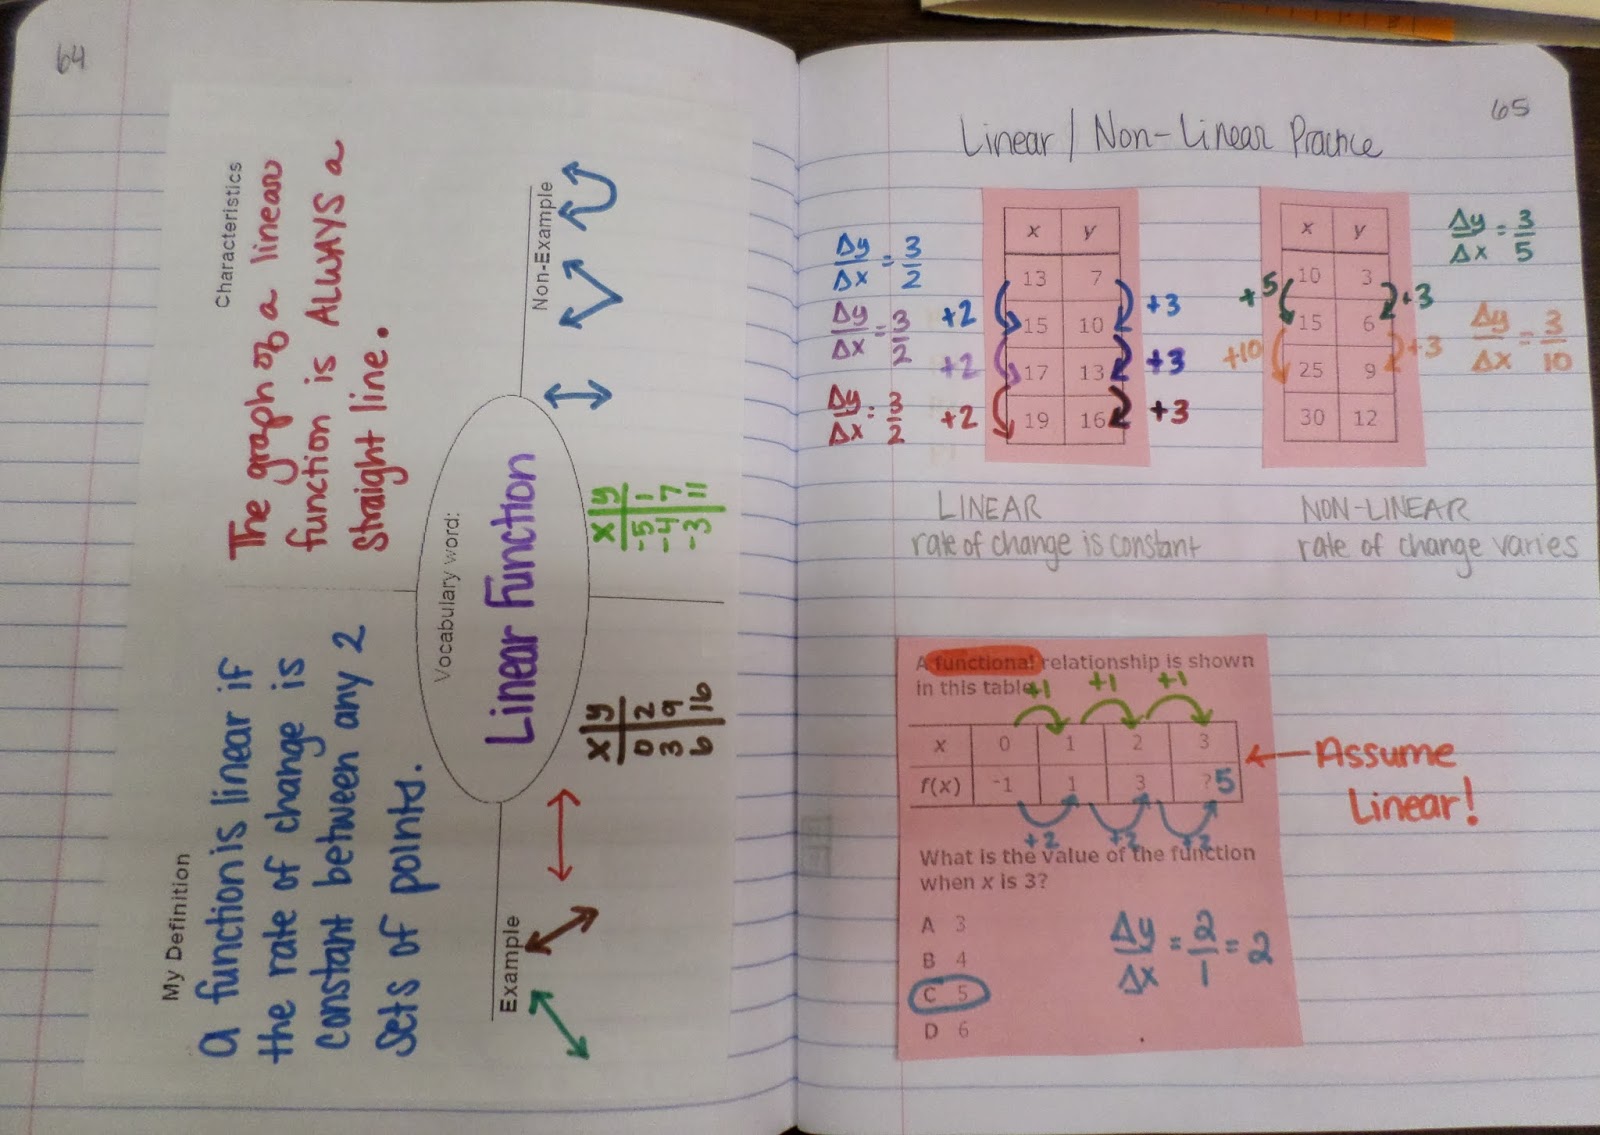 linear function frayer model (left page) and linear vs non-linear practice (right page) interactive notebook page for algebra 1 